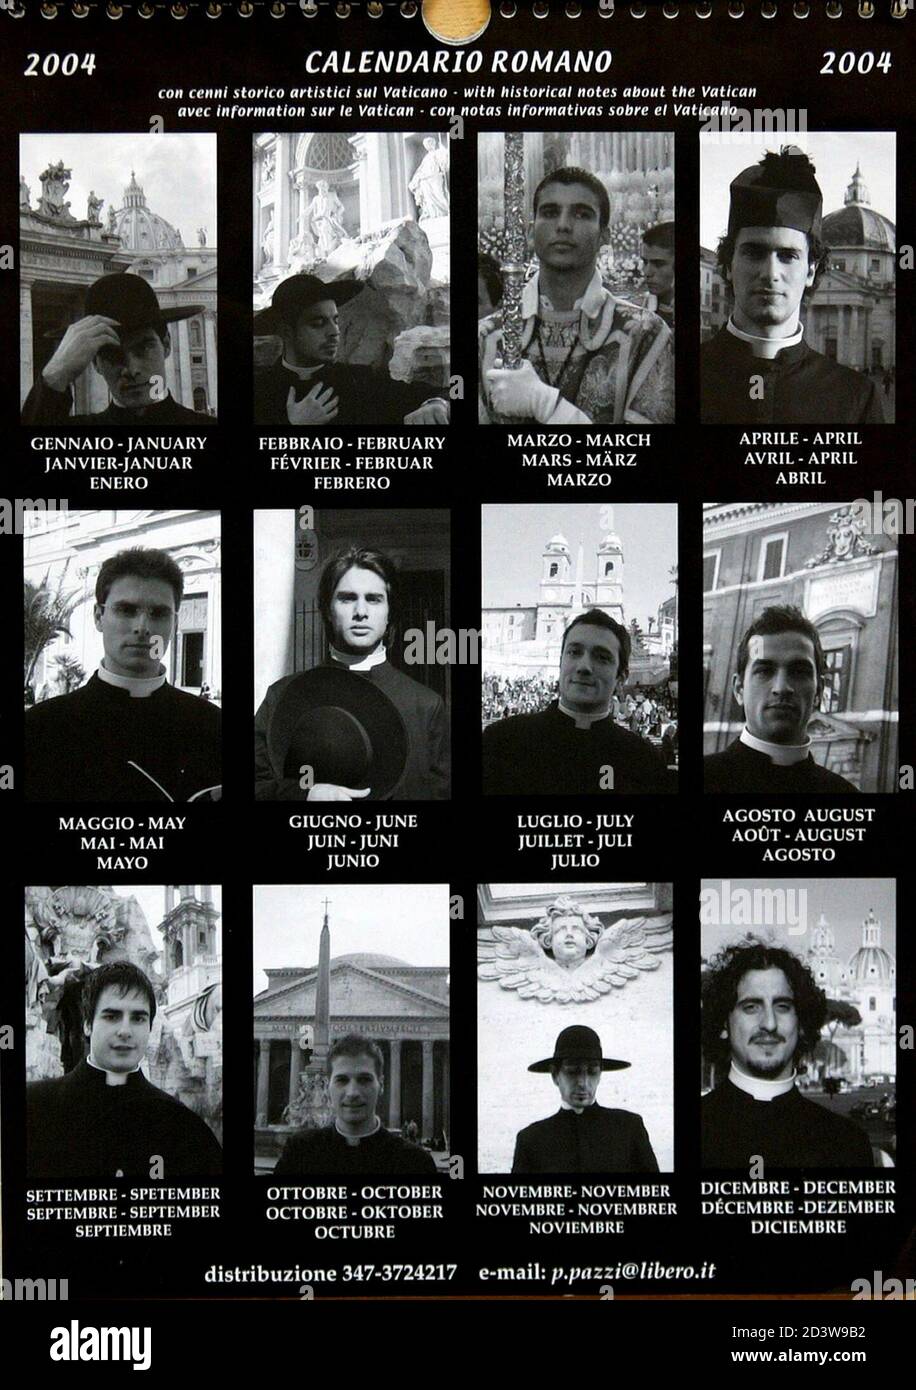 A reproduction photograph released on April 21, 2003 shows all 12 months  within the "Calendario Romano 2004". The calendar by Italian photographer  Piero Pazzi, features Italian priests and seminarians posing in front